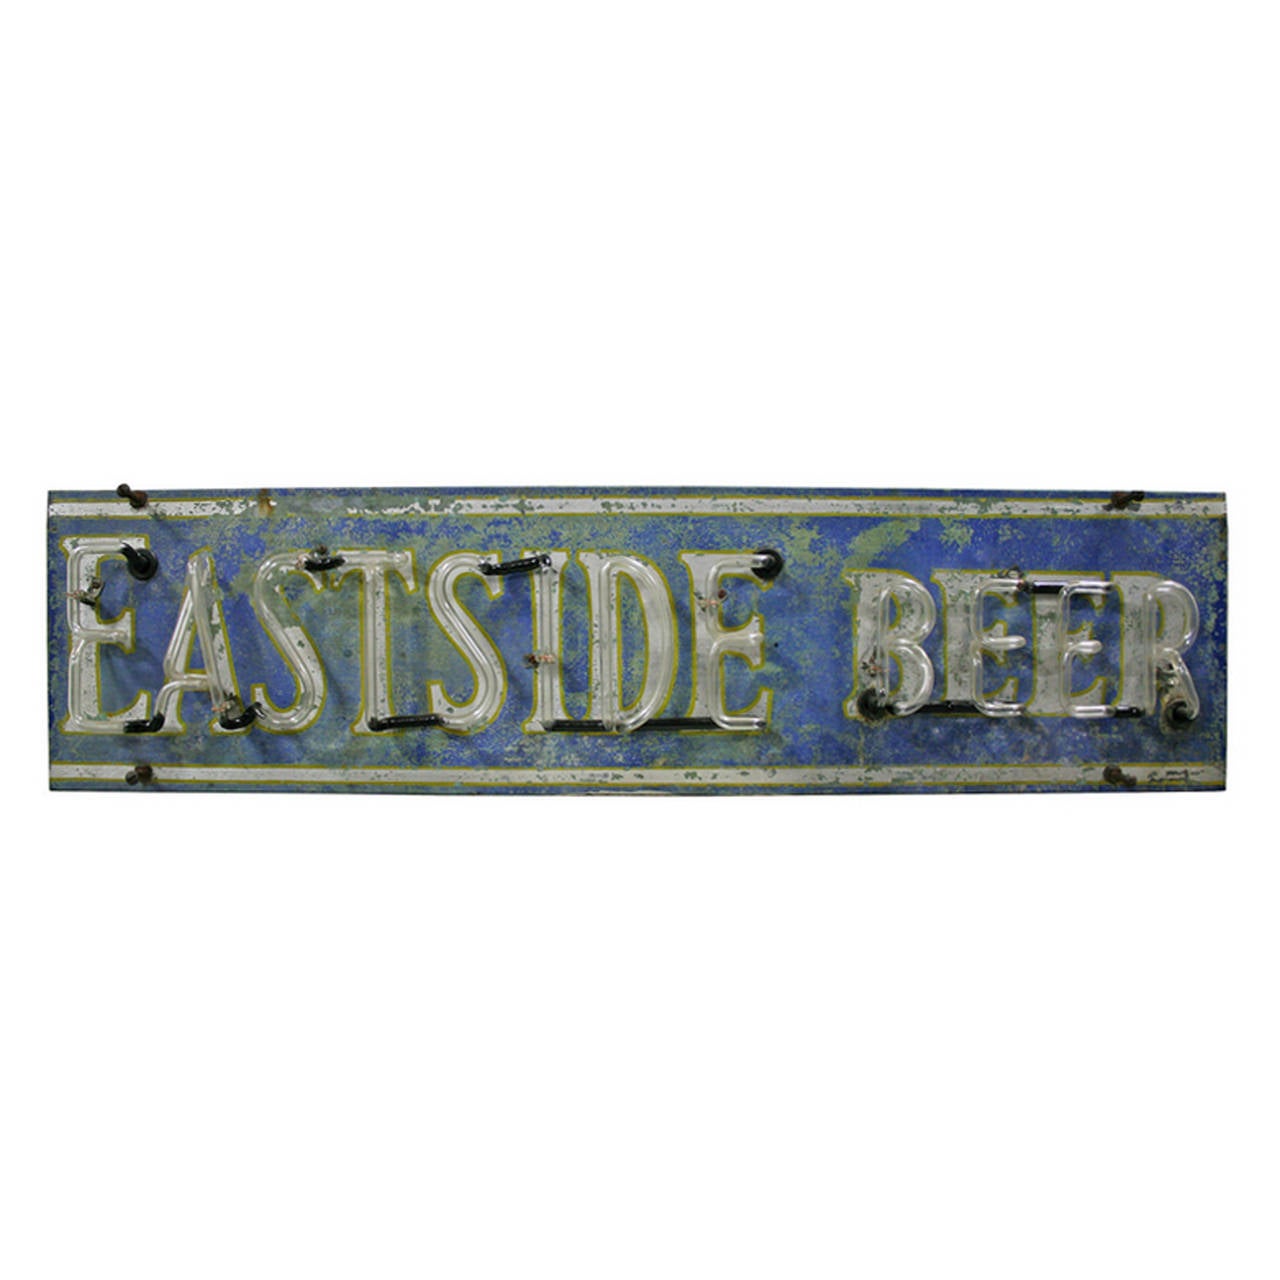 This neon sign holds a special place in our hearts. Not only is it the oldest in our collection, but it also represents a West Coast brewing company, Eastside Beer. Even when unlit, this is a delightful sign, with blue, white and yellow lettering.